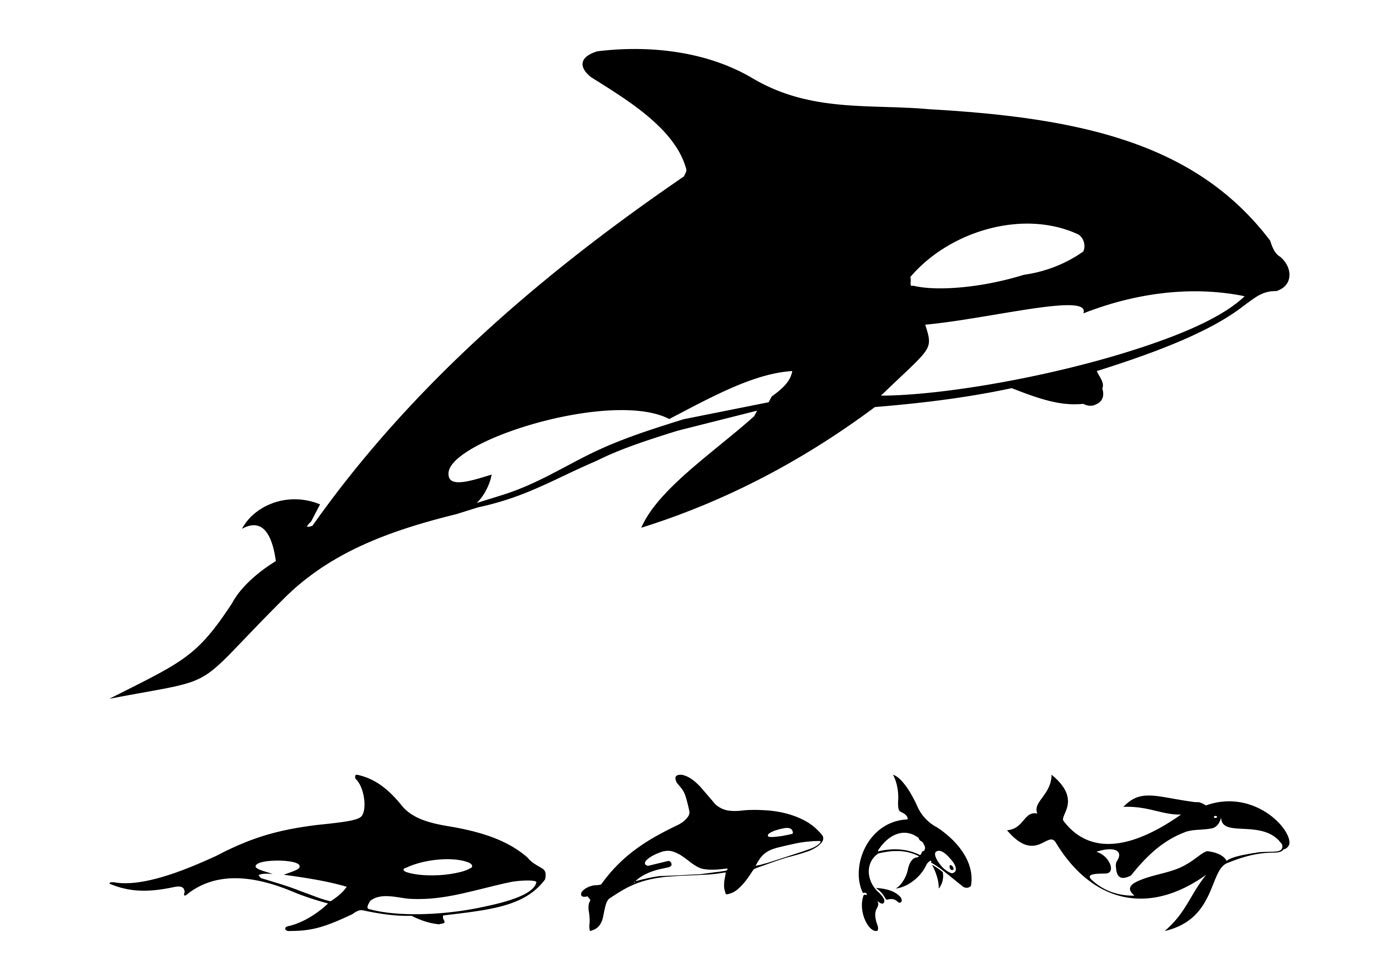 Whale Free Vector Art - (1396 Free Downloads)